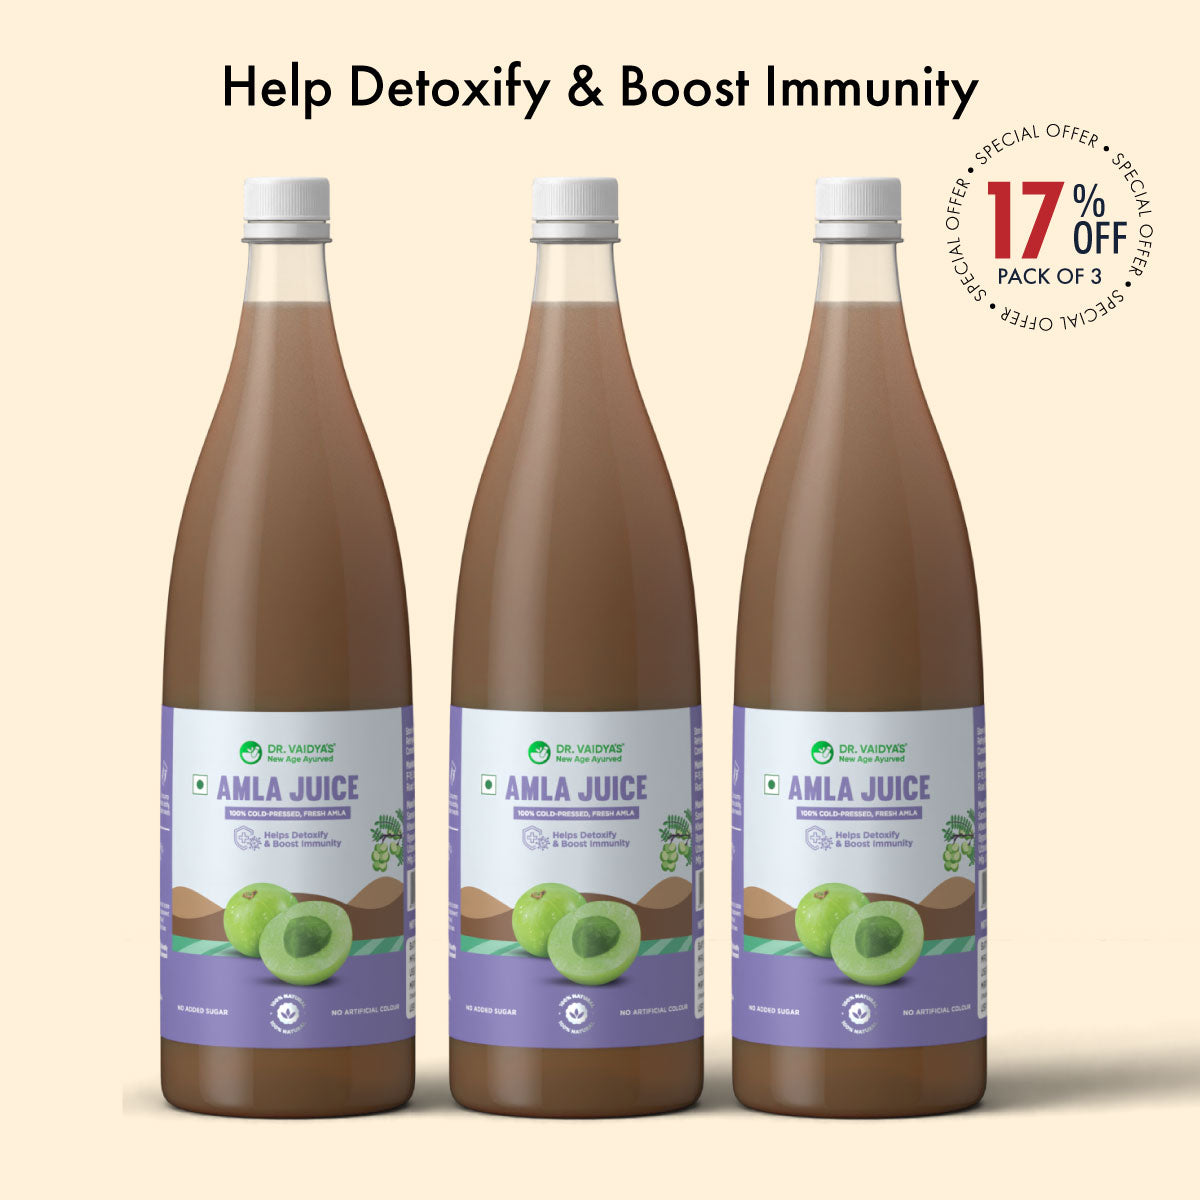 Amla Juice: For healthy liver, hair & skin and improved sugar & energy levels